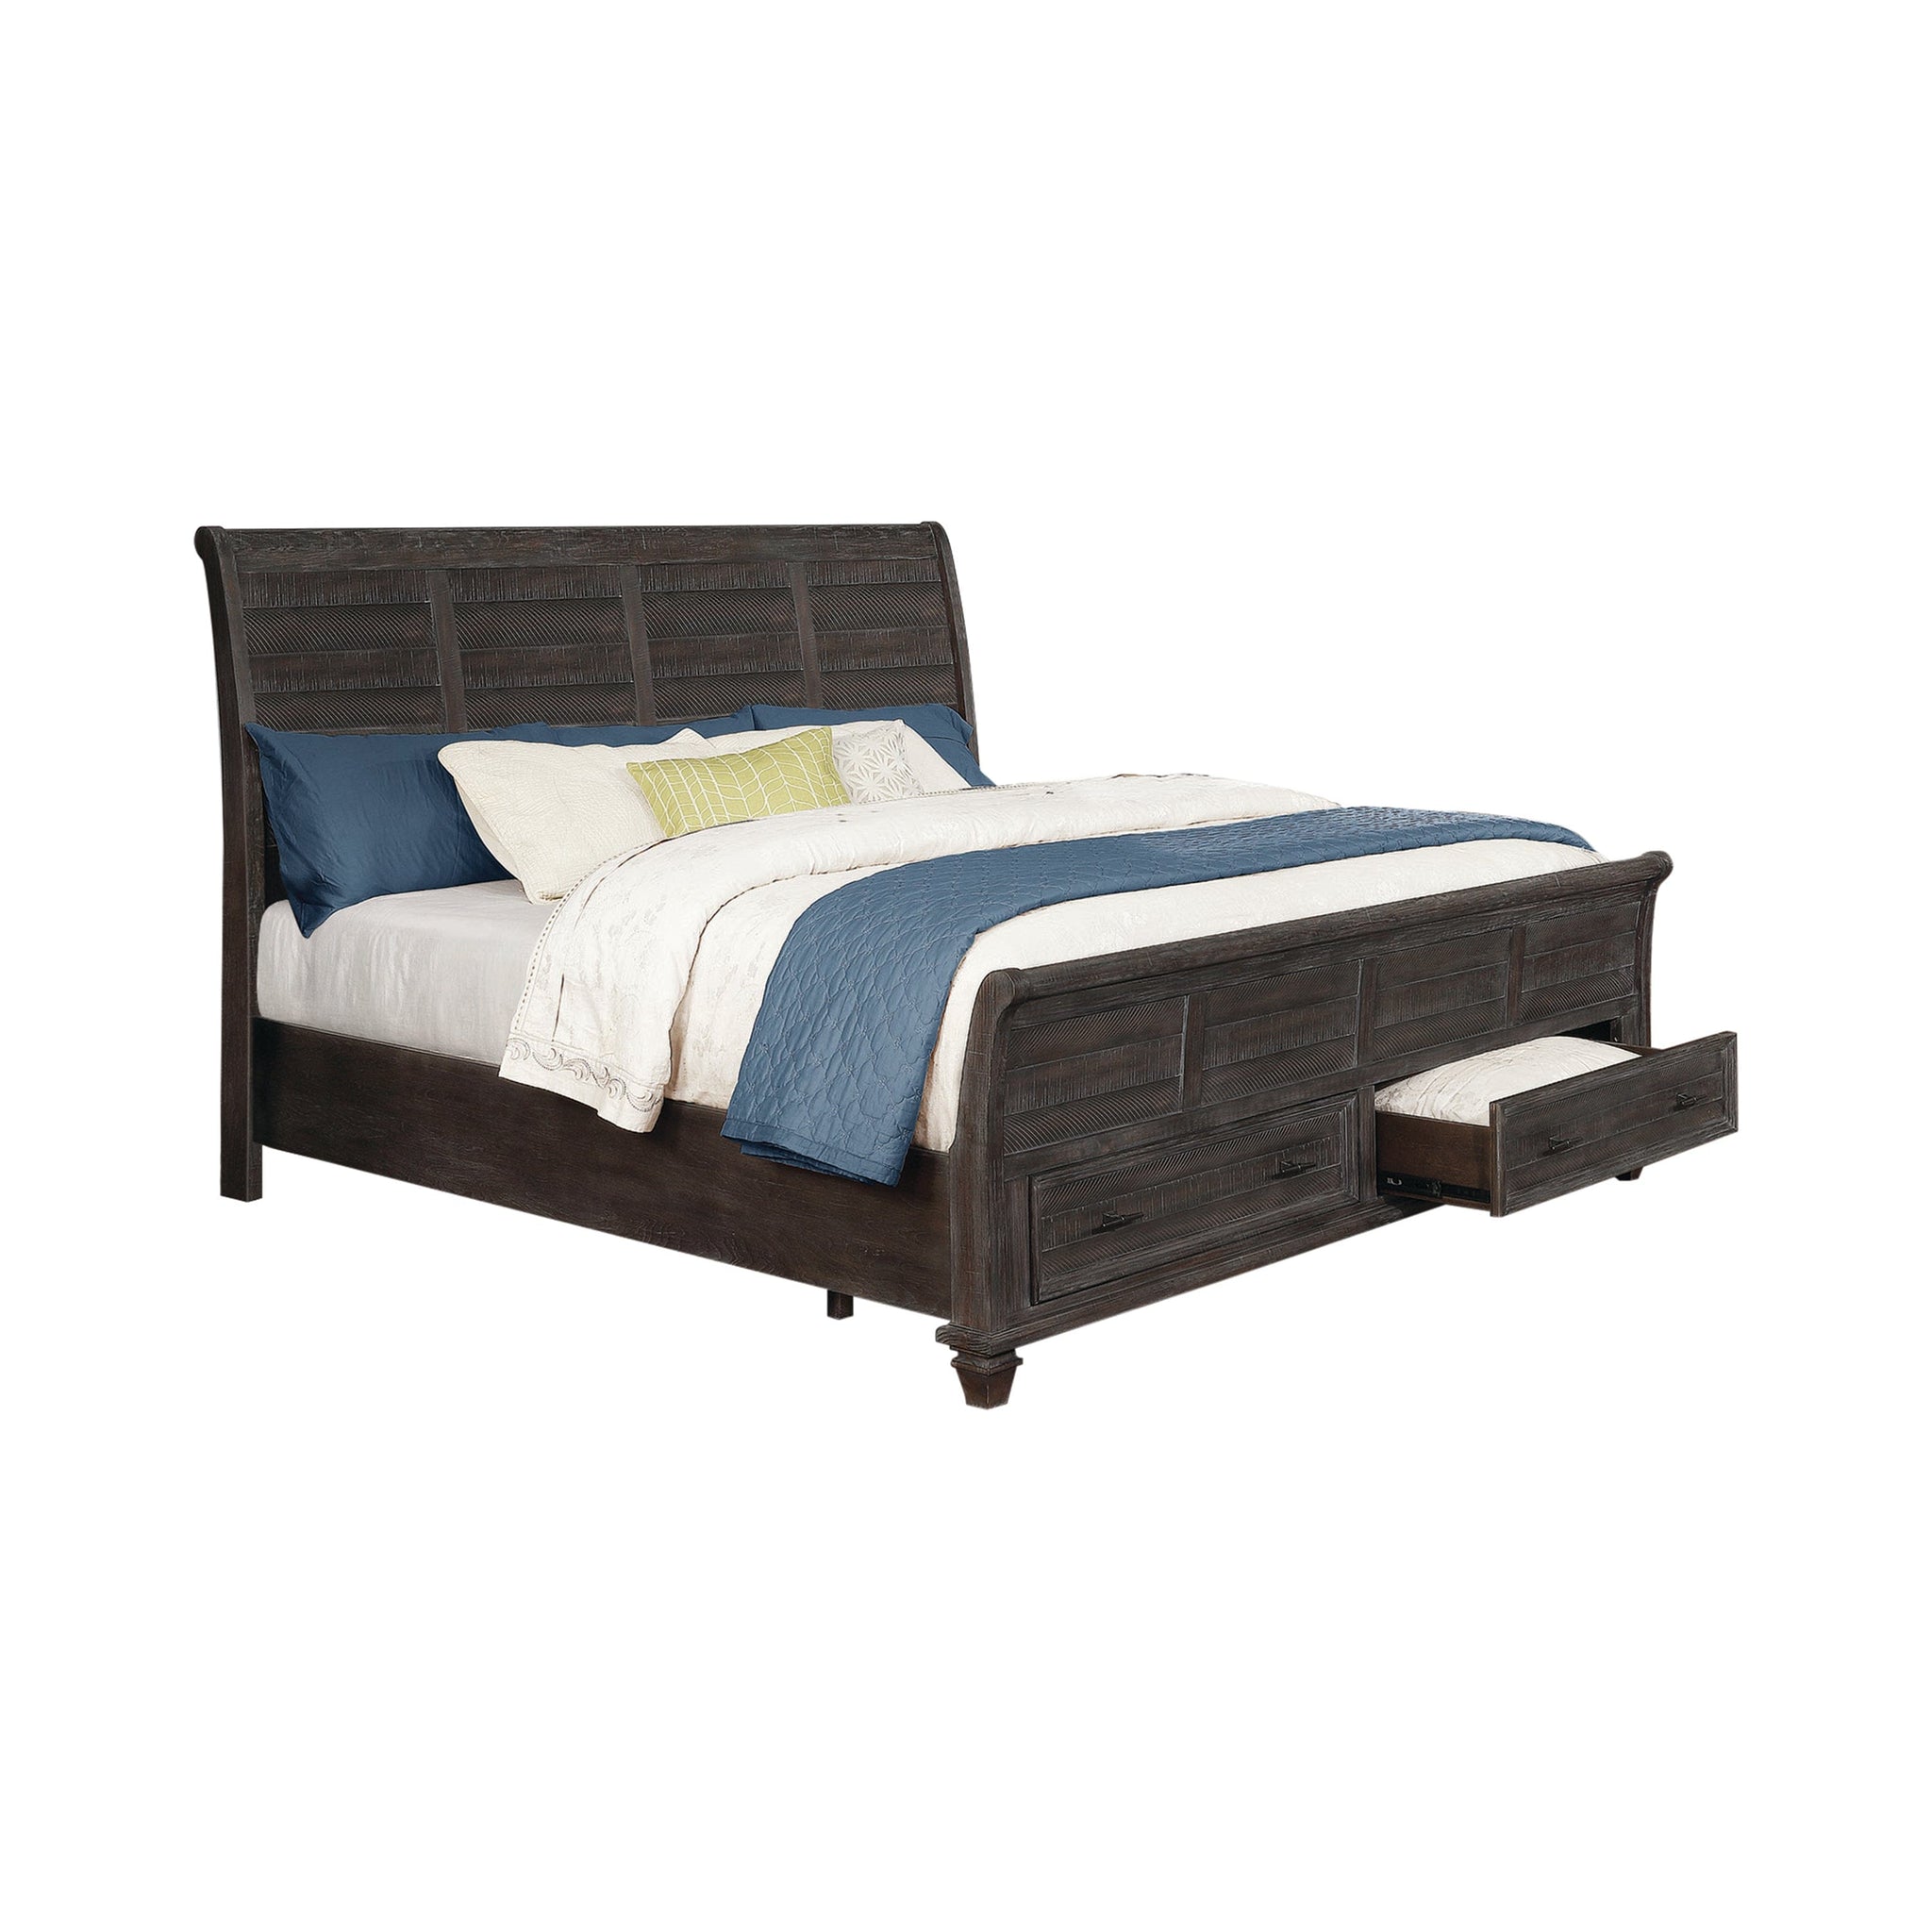 Atascadero Eastern King 2-Drawer Storage Bed Weathered Carbon Collection: Transitional Style Bed Captures The Attention In Your Room, Storage Drawers Add Functionality. A Bed To Relax On. SKU: 222880KE